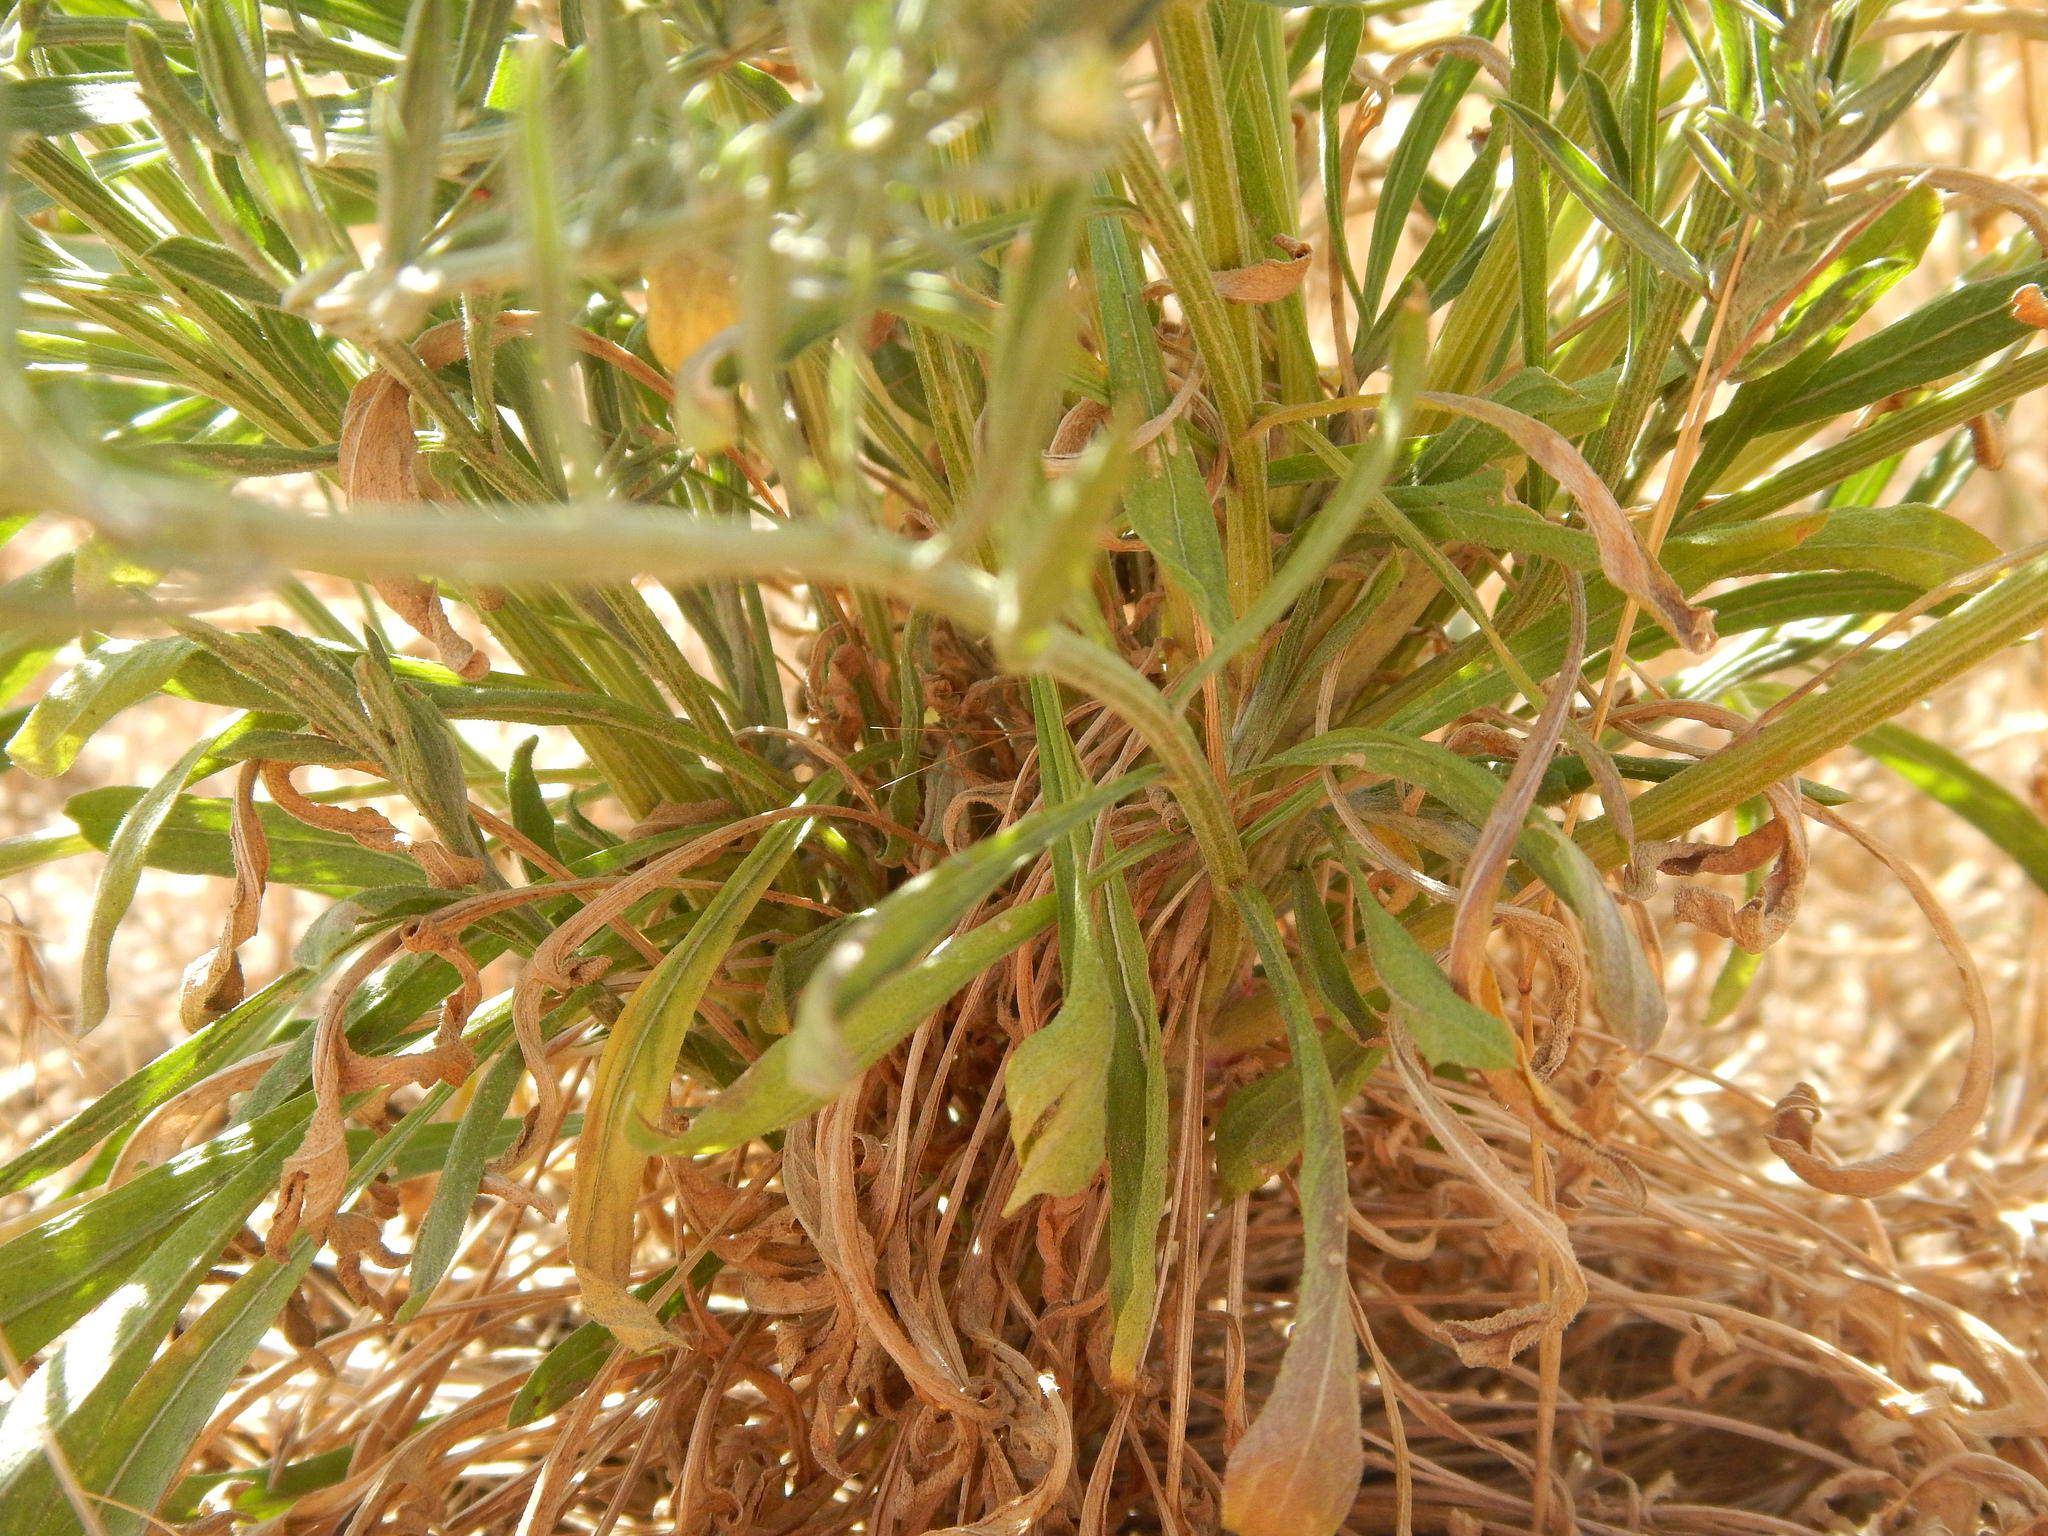 Base of plant with numerous leaves